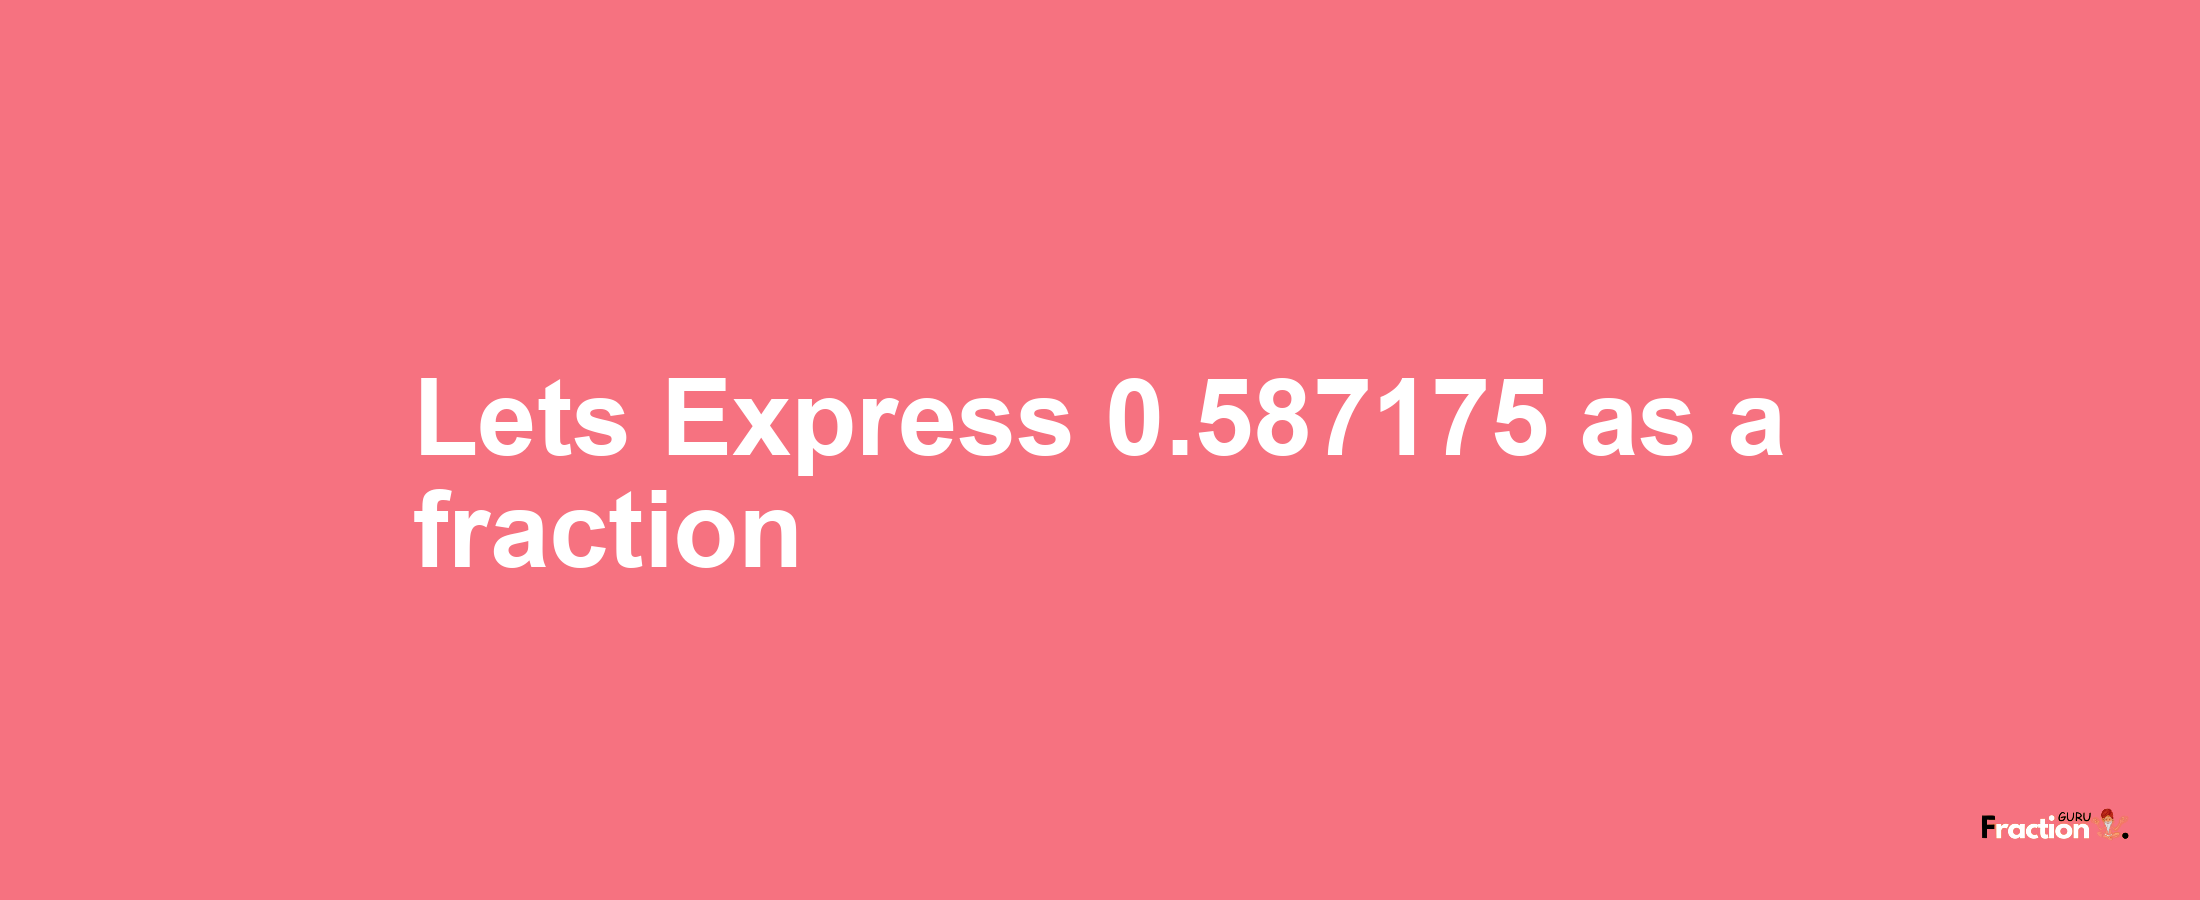 Lets Express 0.587175 as afraction